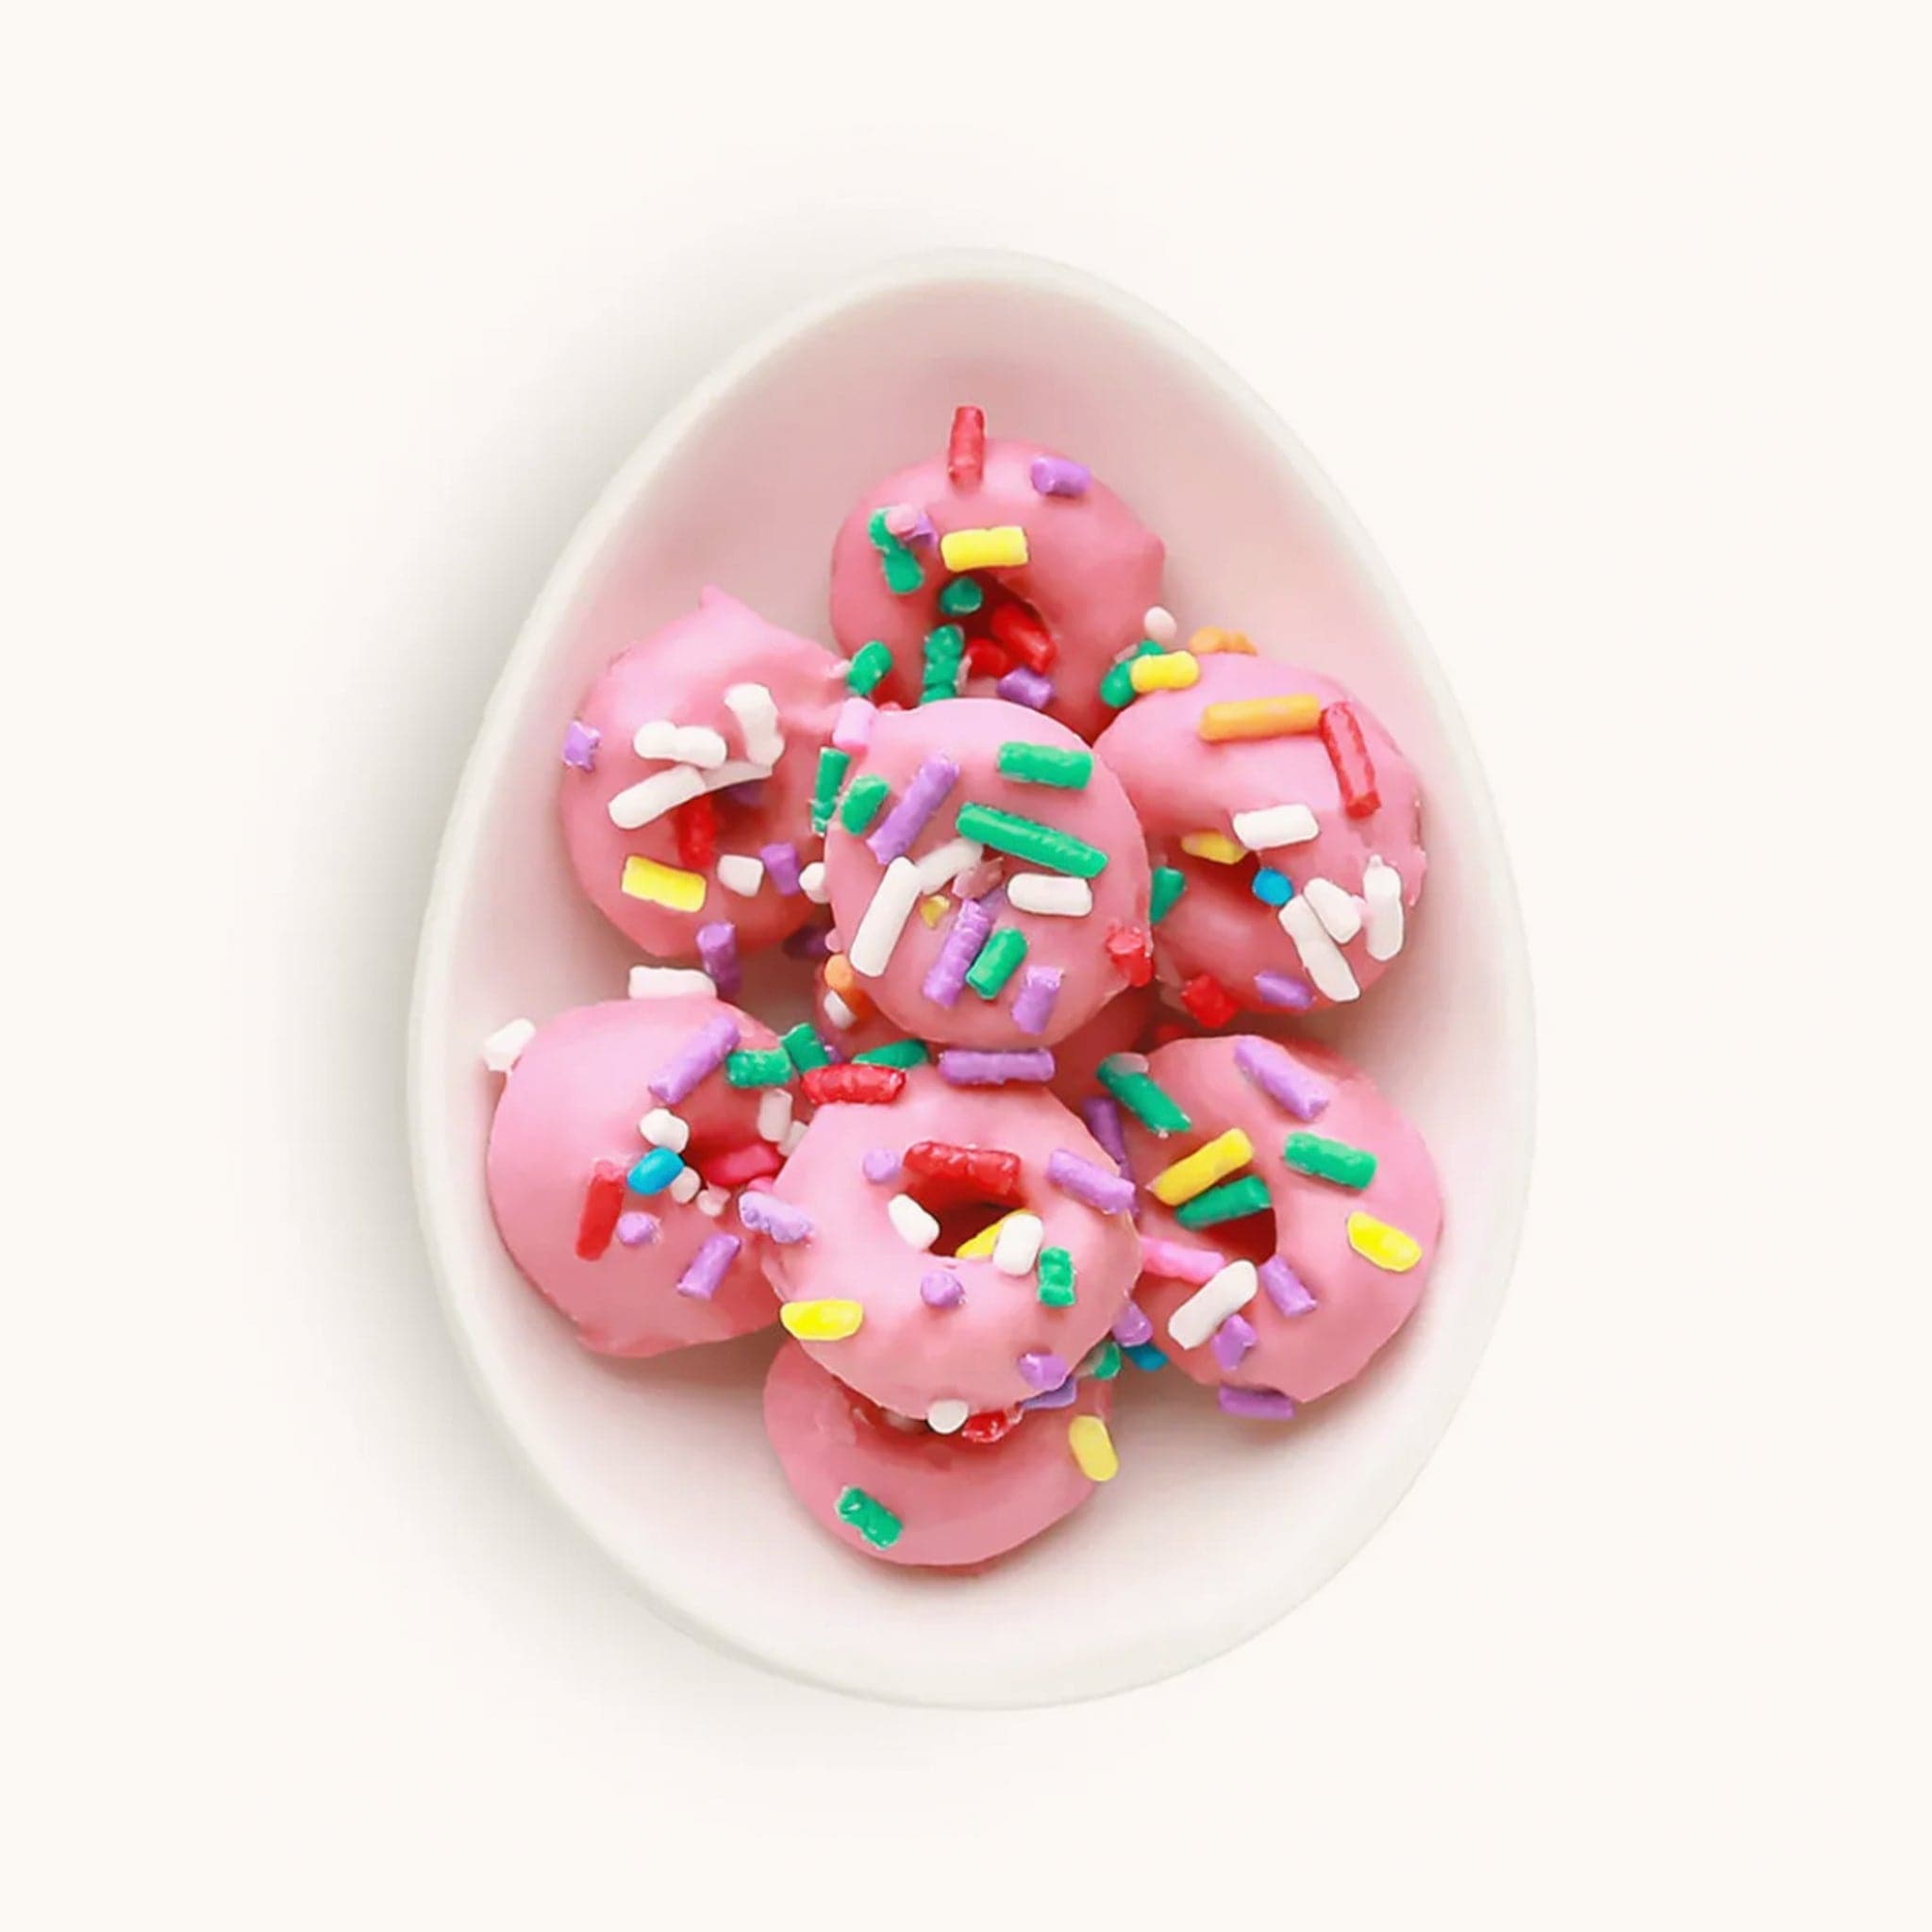 Miniature pink donut candies topped with colorful sprinkles. The candies are placed in a small white bowl. 